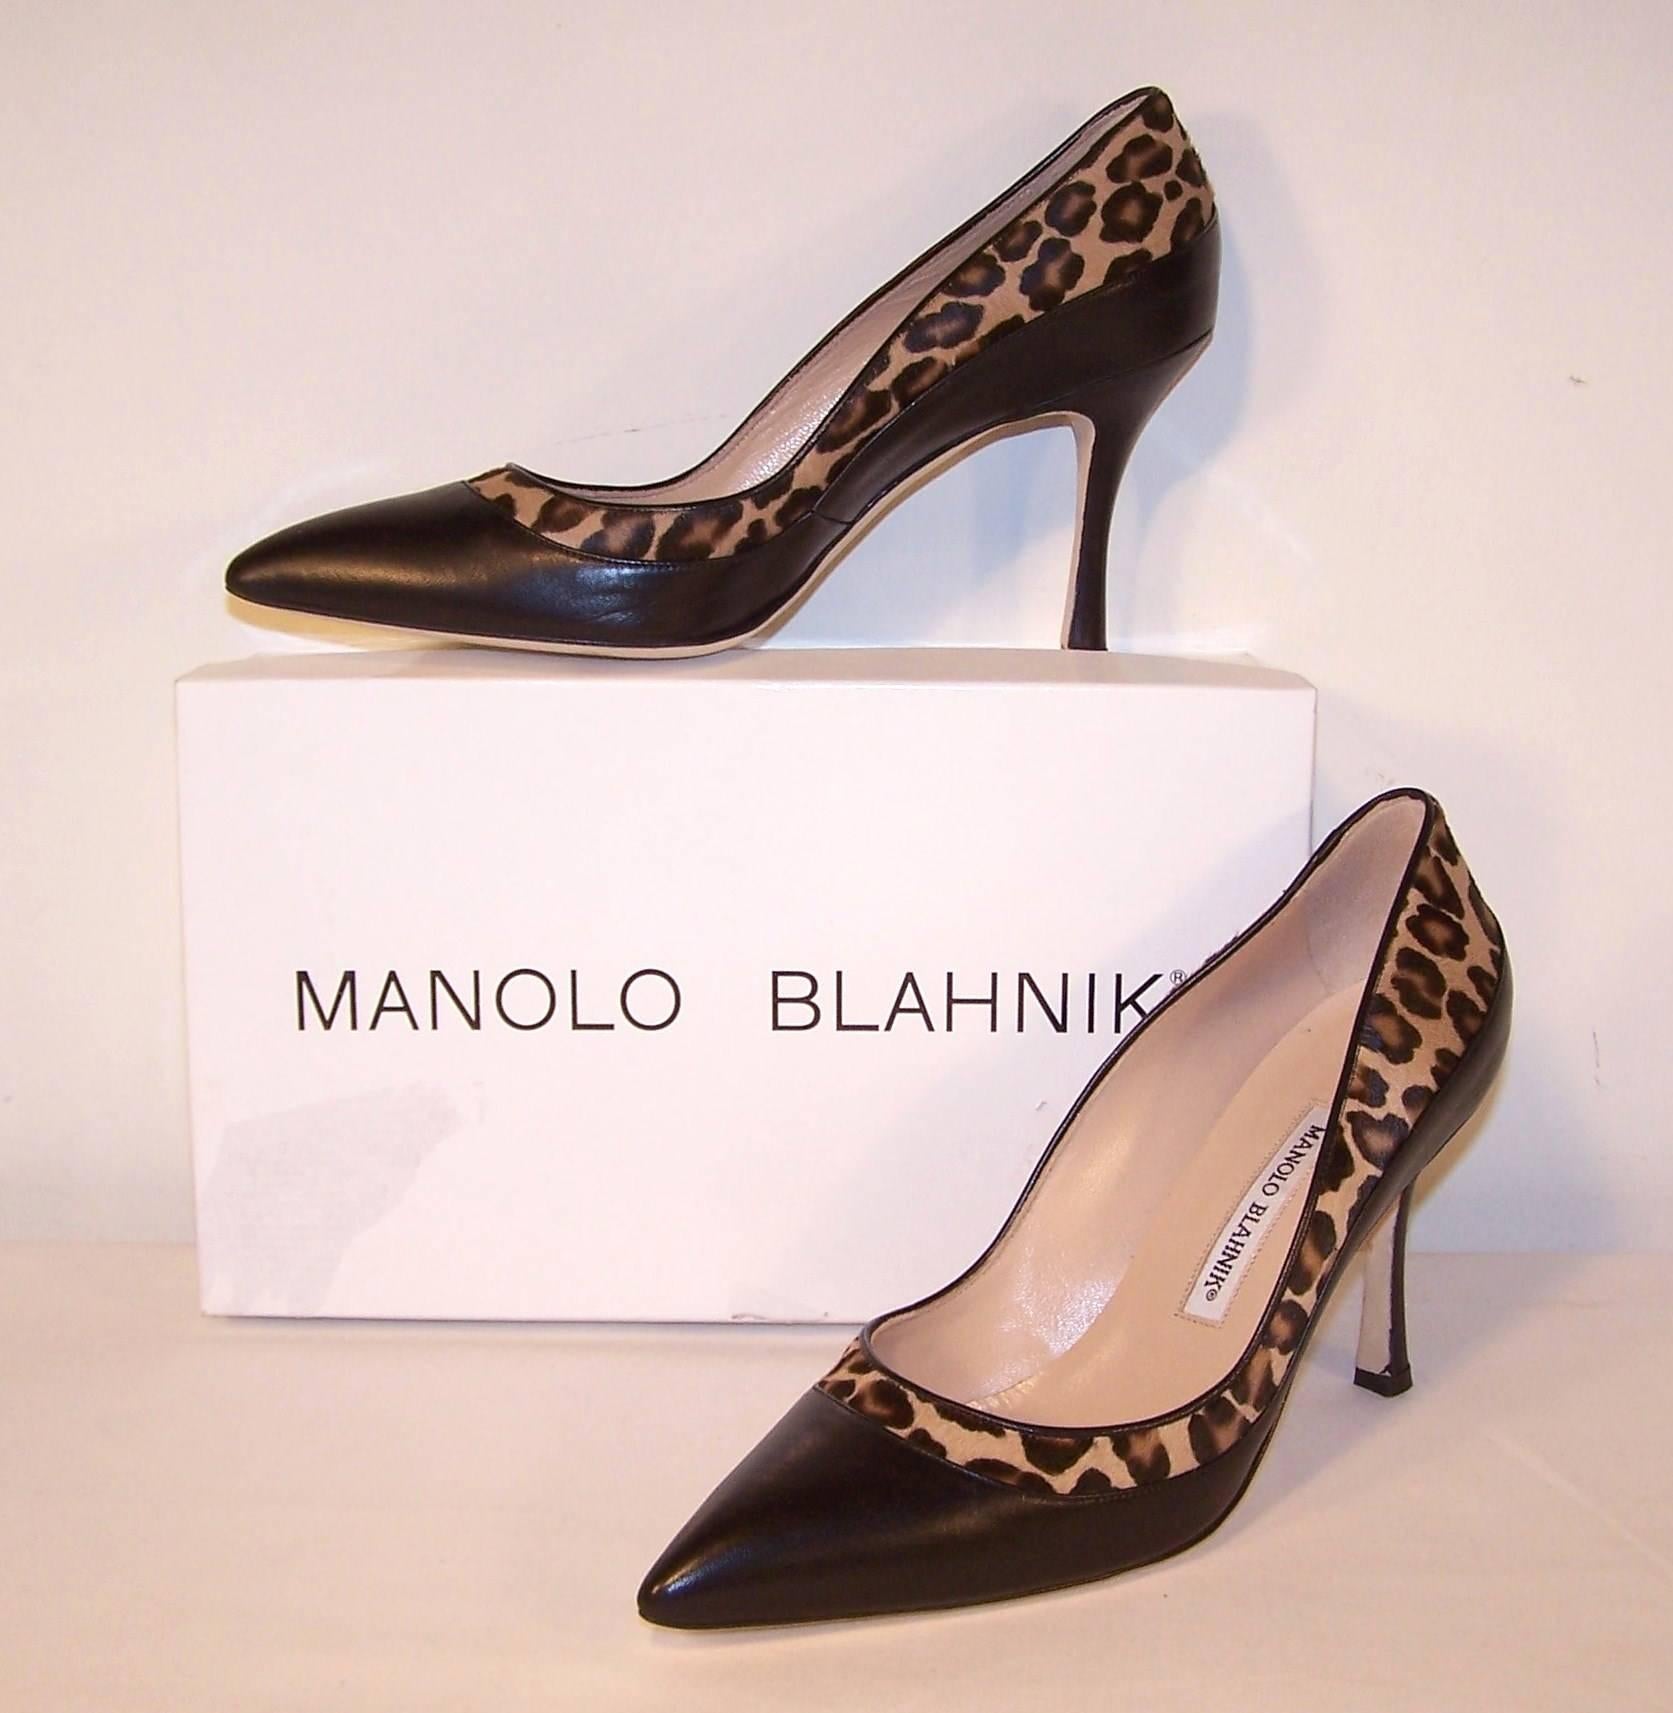 These Manolo Blahnik's are to die for...purchased from Neiman Marcus and never worn.  The body of this classic pointy toe pump is black leather with a vamp decorated in leopard printed pony.  The 3.75" heel is actually comfortable and suitable